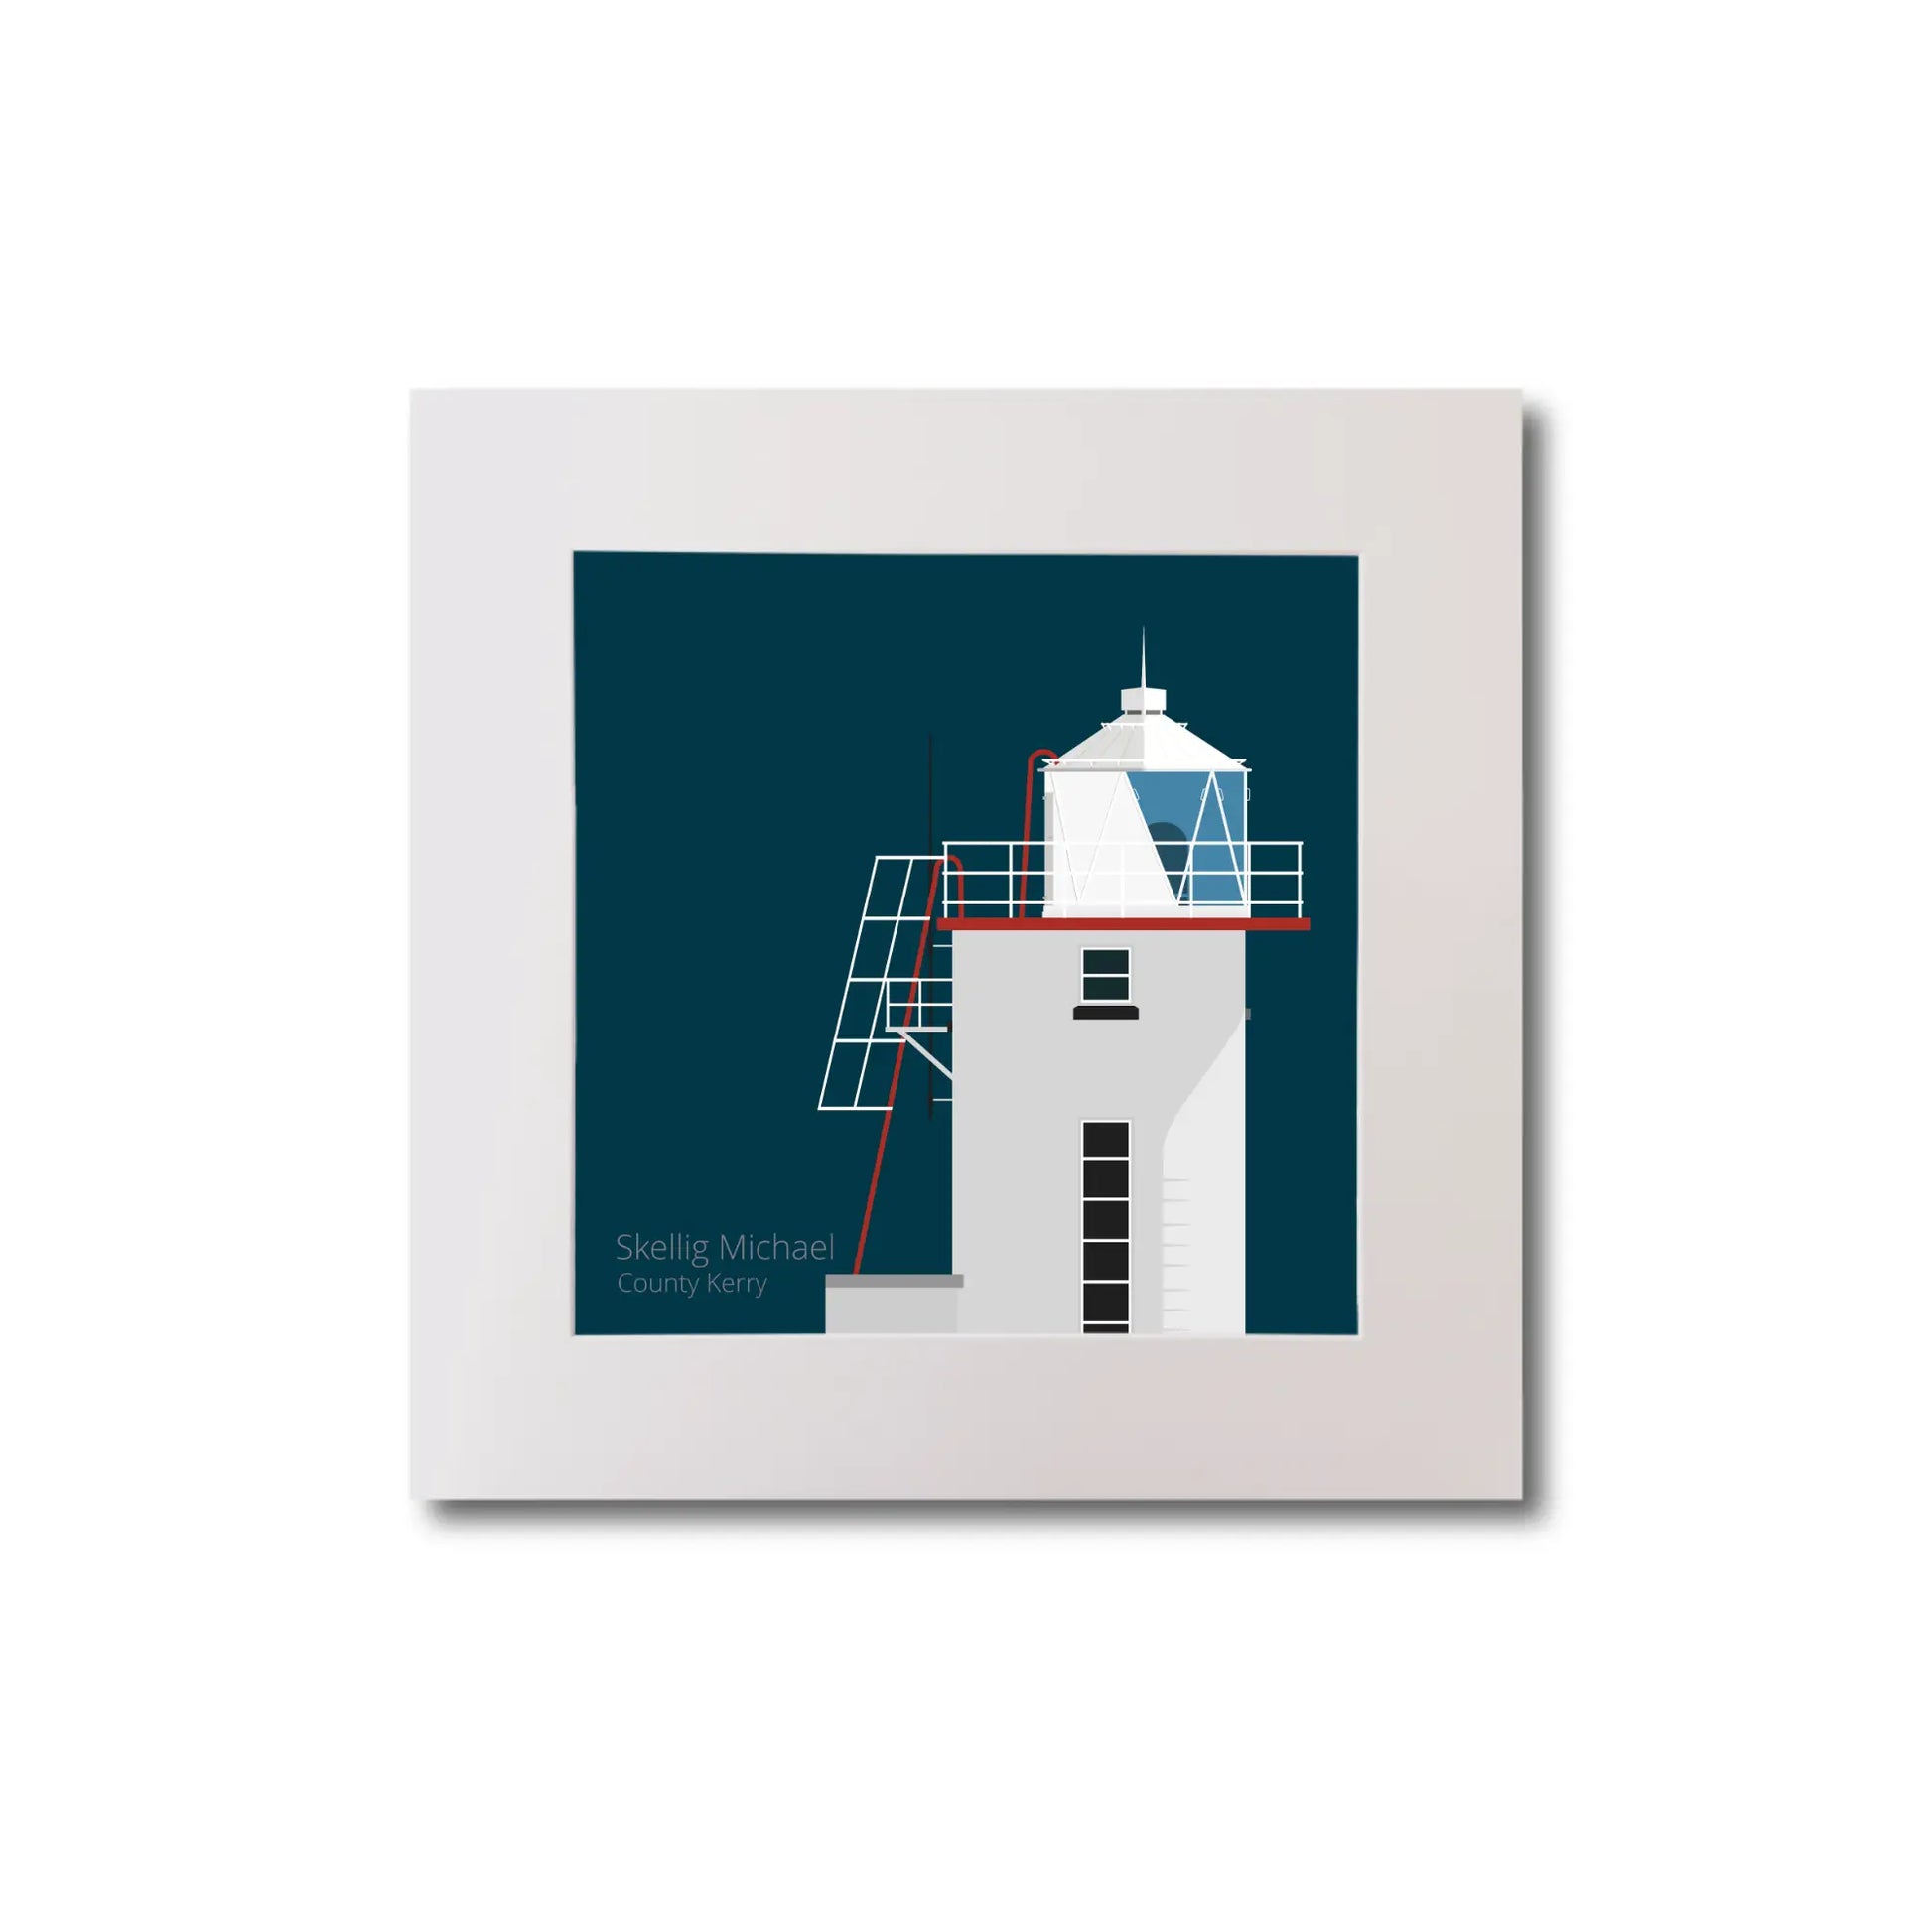 Illustration of Skellig Michael lighthouse on a midnight blue background, mounted and measuring 20x20cm.